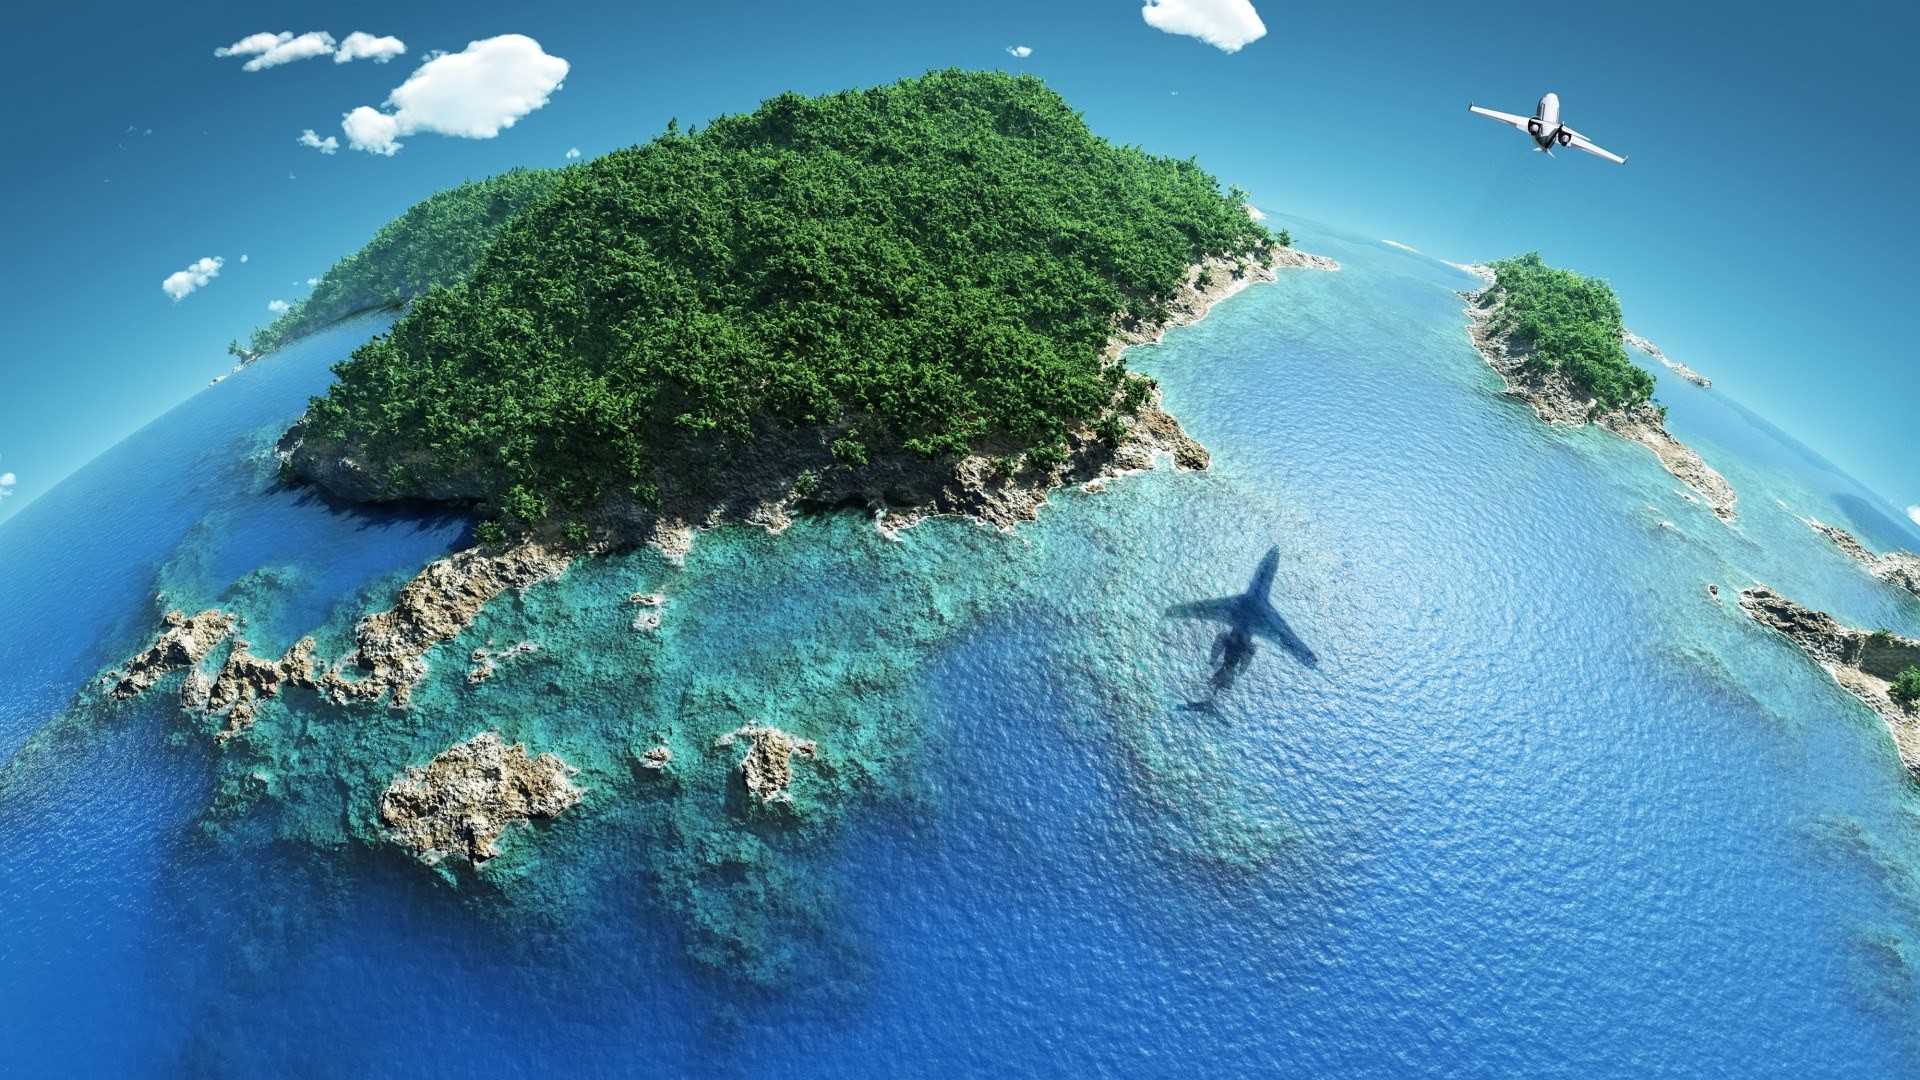 nature, Landscape, Sea, Coast, Island, Photo manipulation, Coral reef, Fisheye lens, Clouds, Trees, Forest, Airplane, Shadow, Aerial view Wallpaper